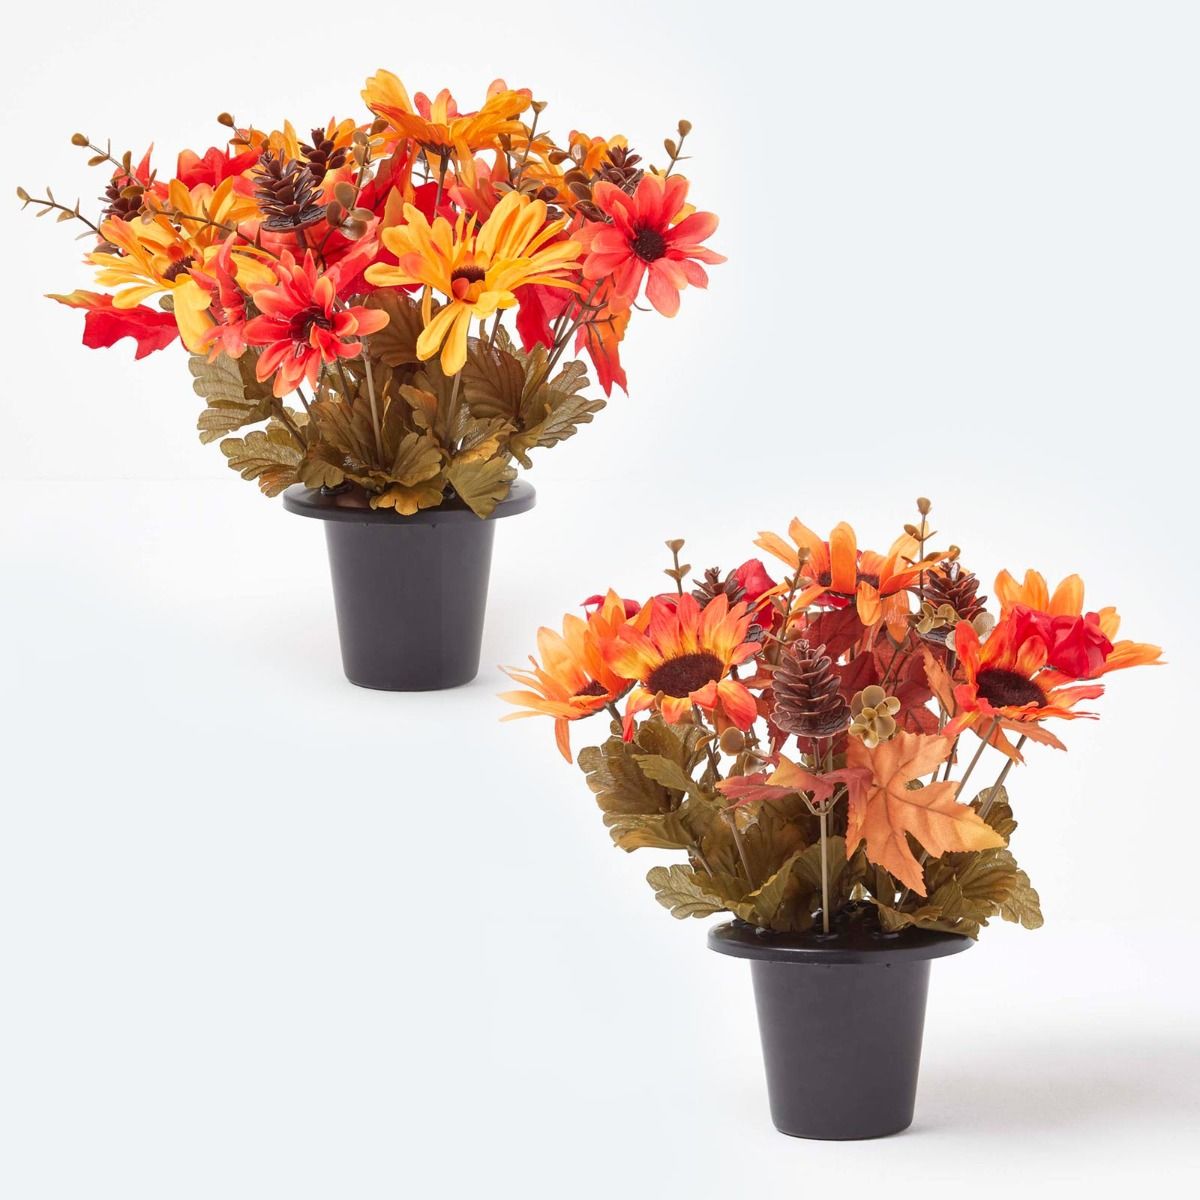 16 Best Artificial Flowers - Where to Buy Realistic Fake Flowers